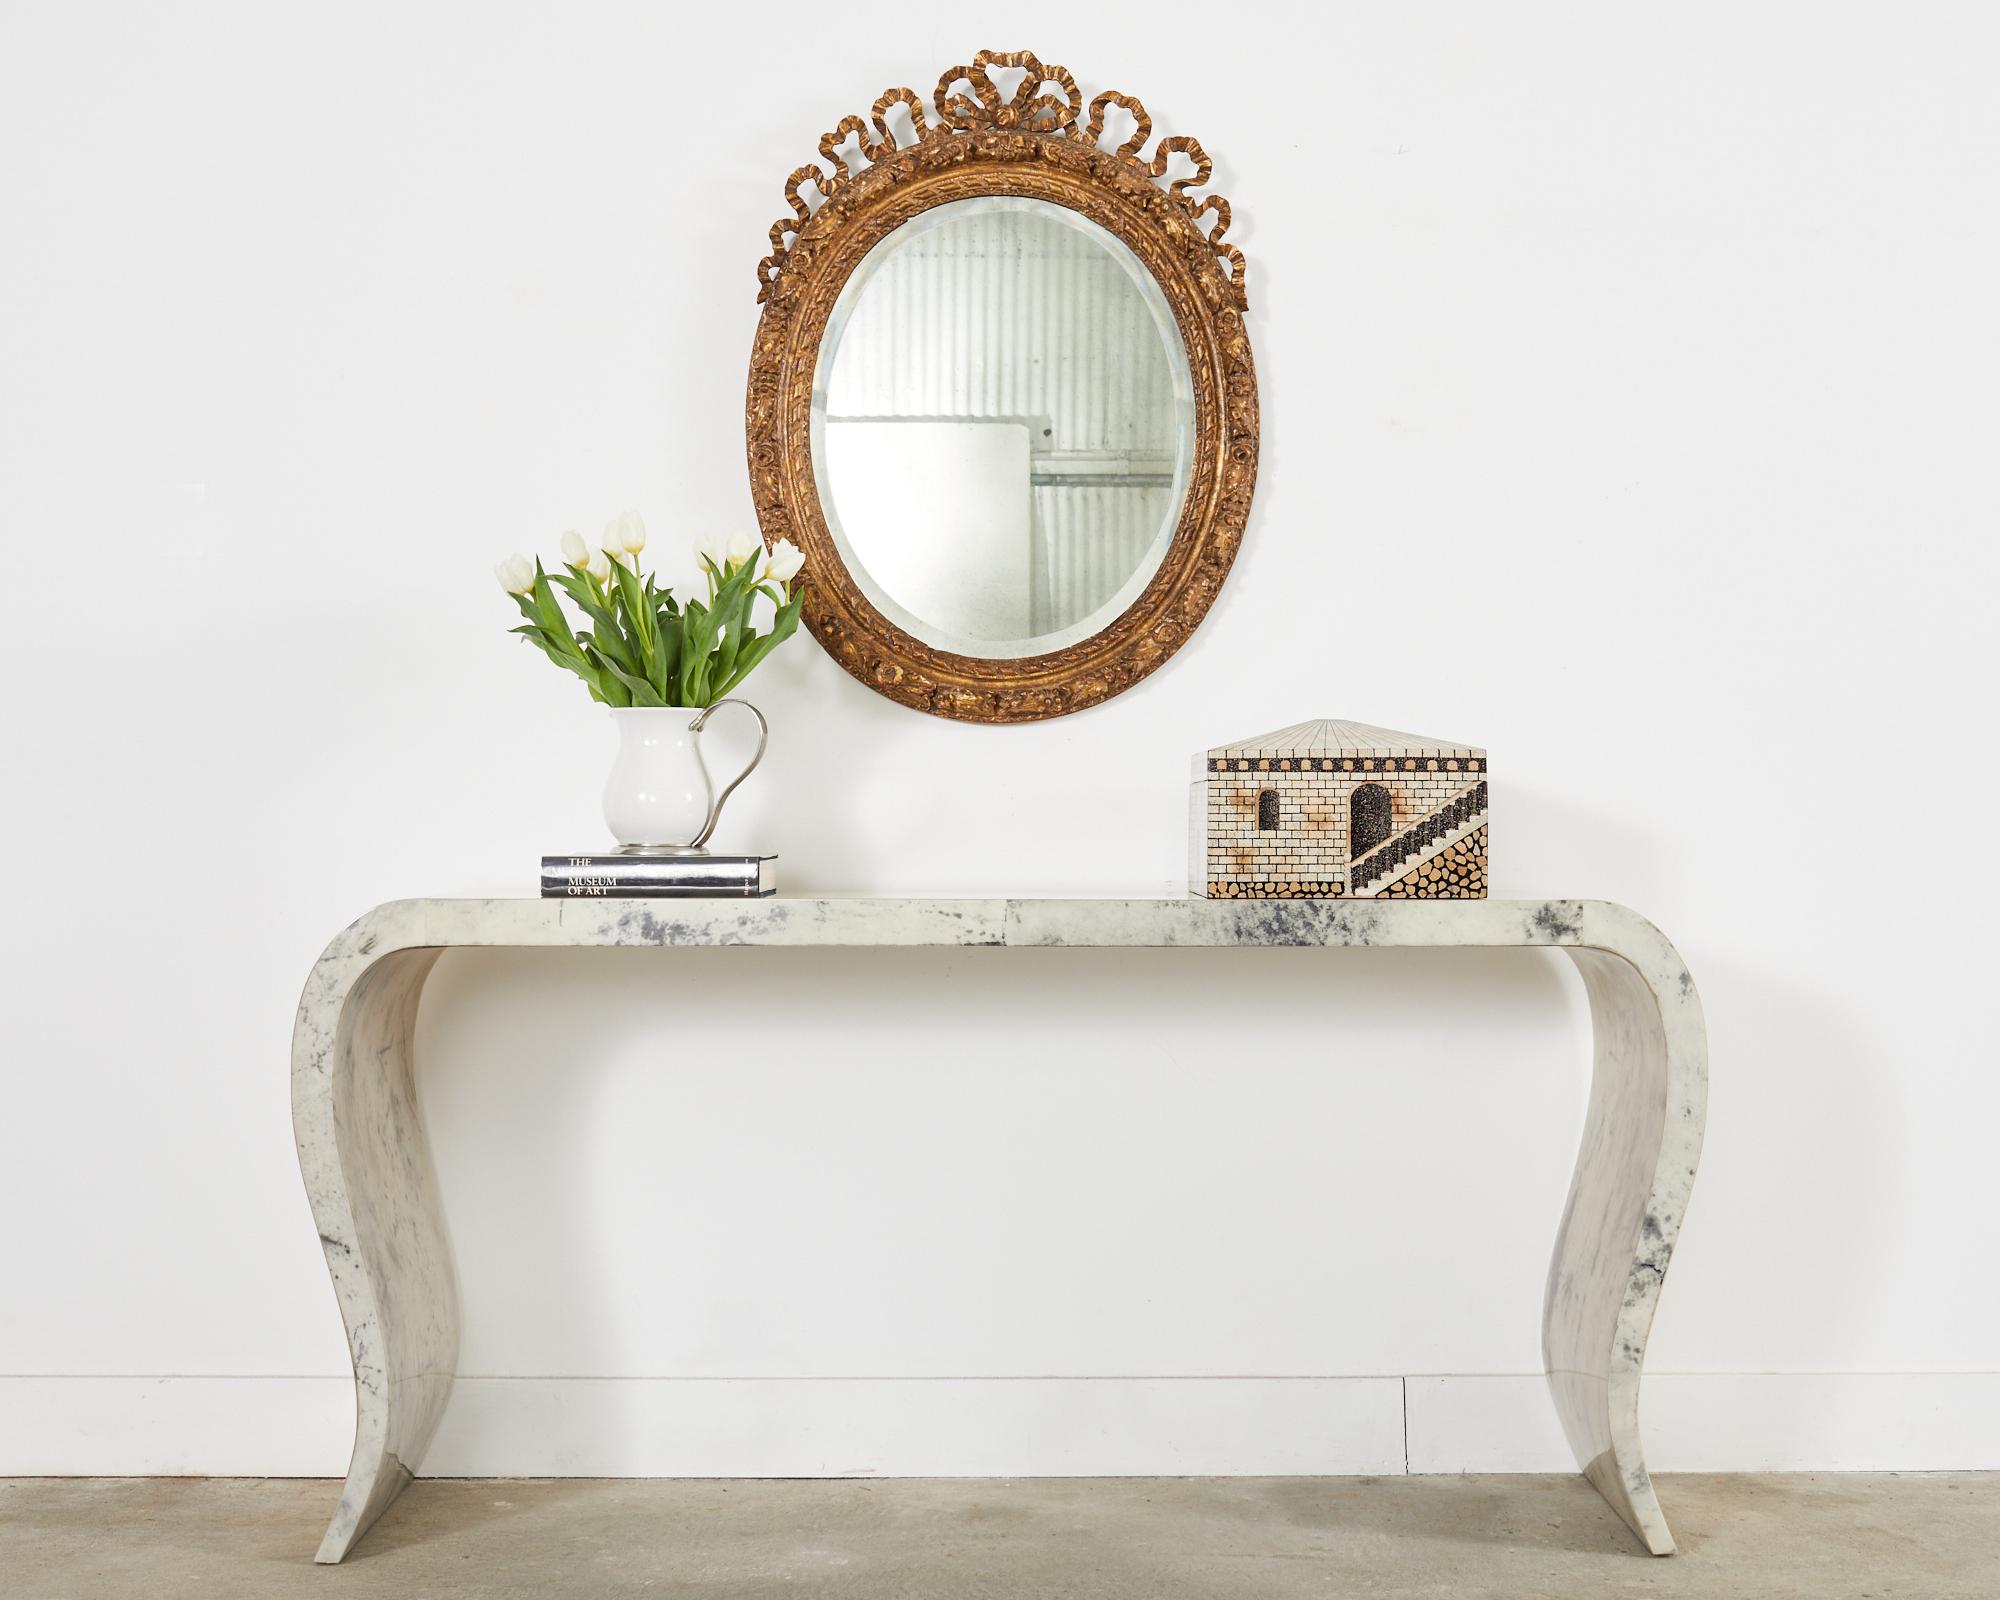 Gorgeous 19th century Italian carved wall mirror made in the grand Louis XVI taste having a baroque style carved frame. The giltwood frame is embellished with oak leaves carvings in an oval form. The frame features a large ribbon finial bow with